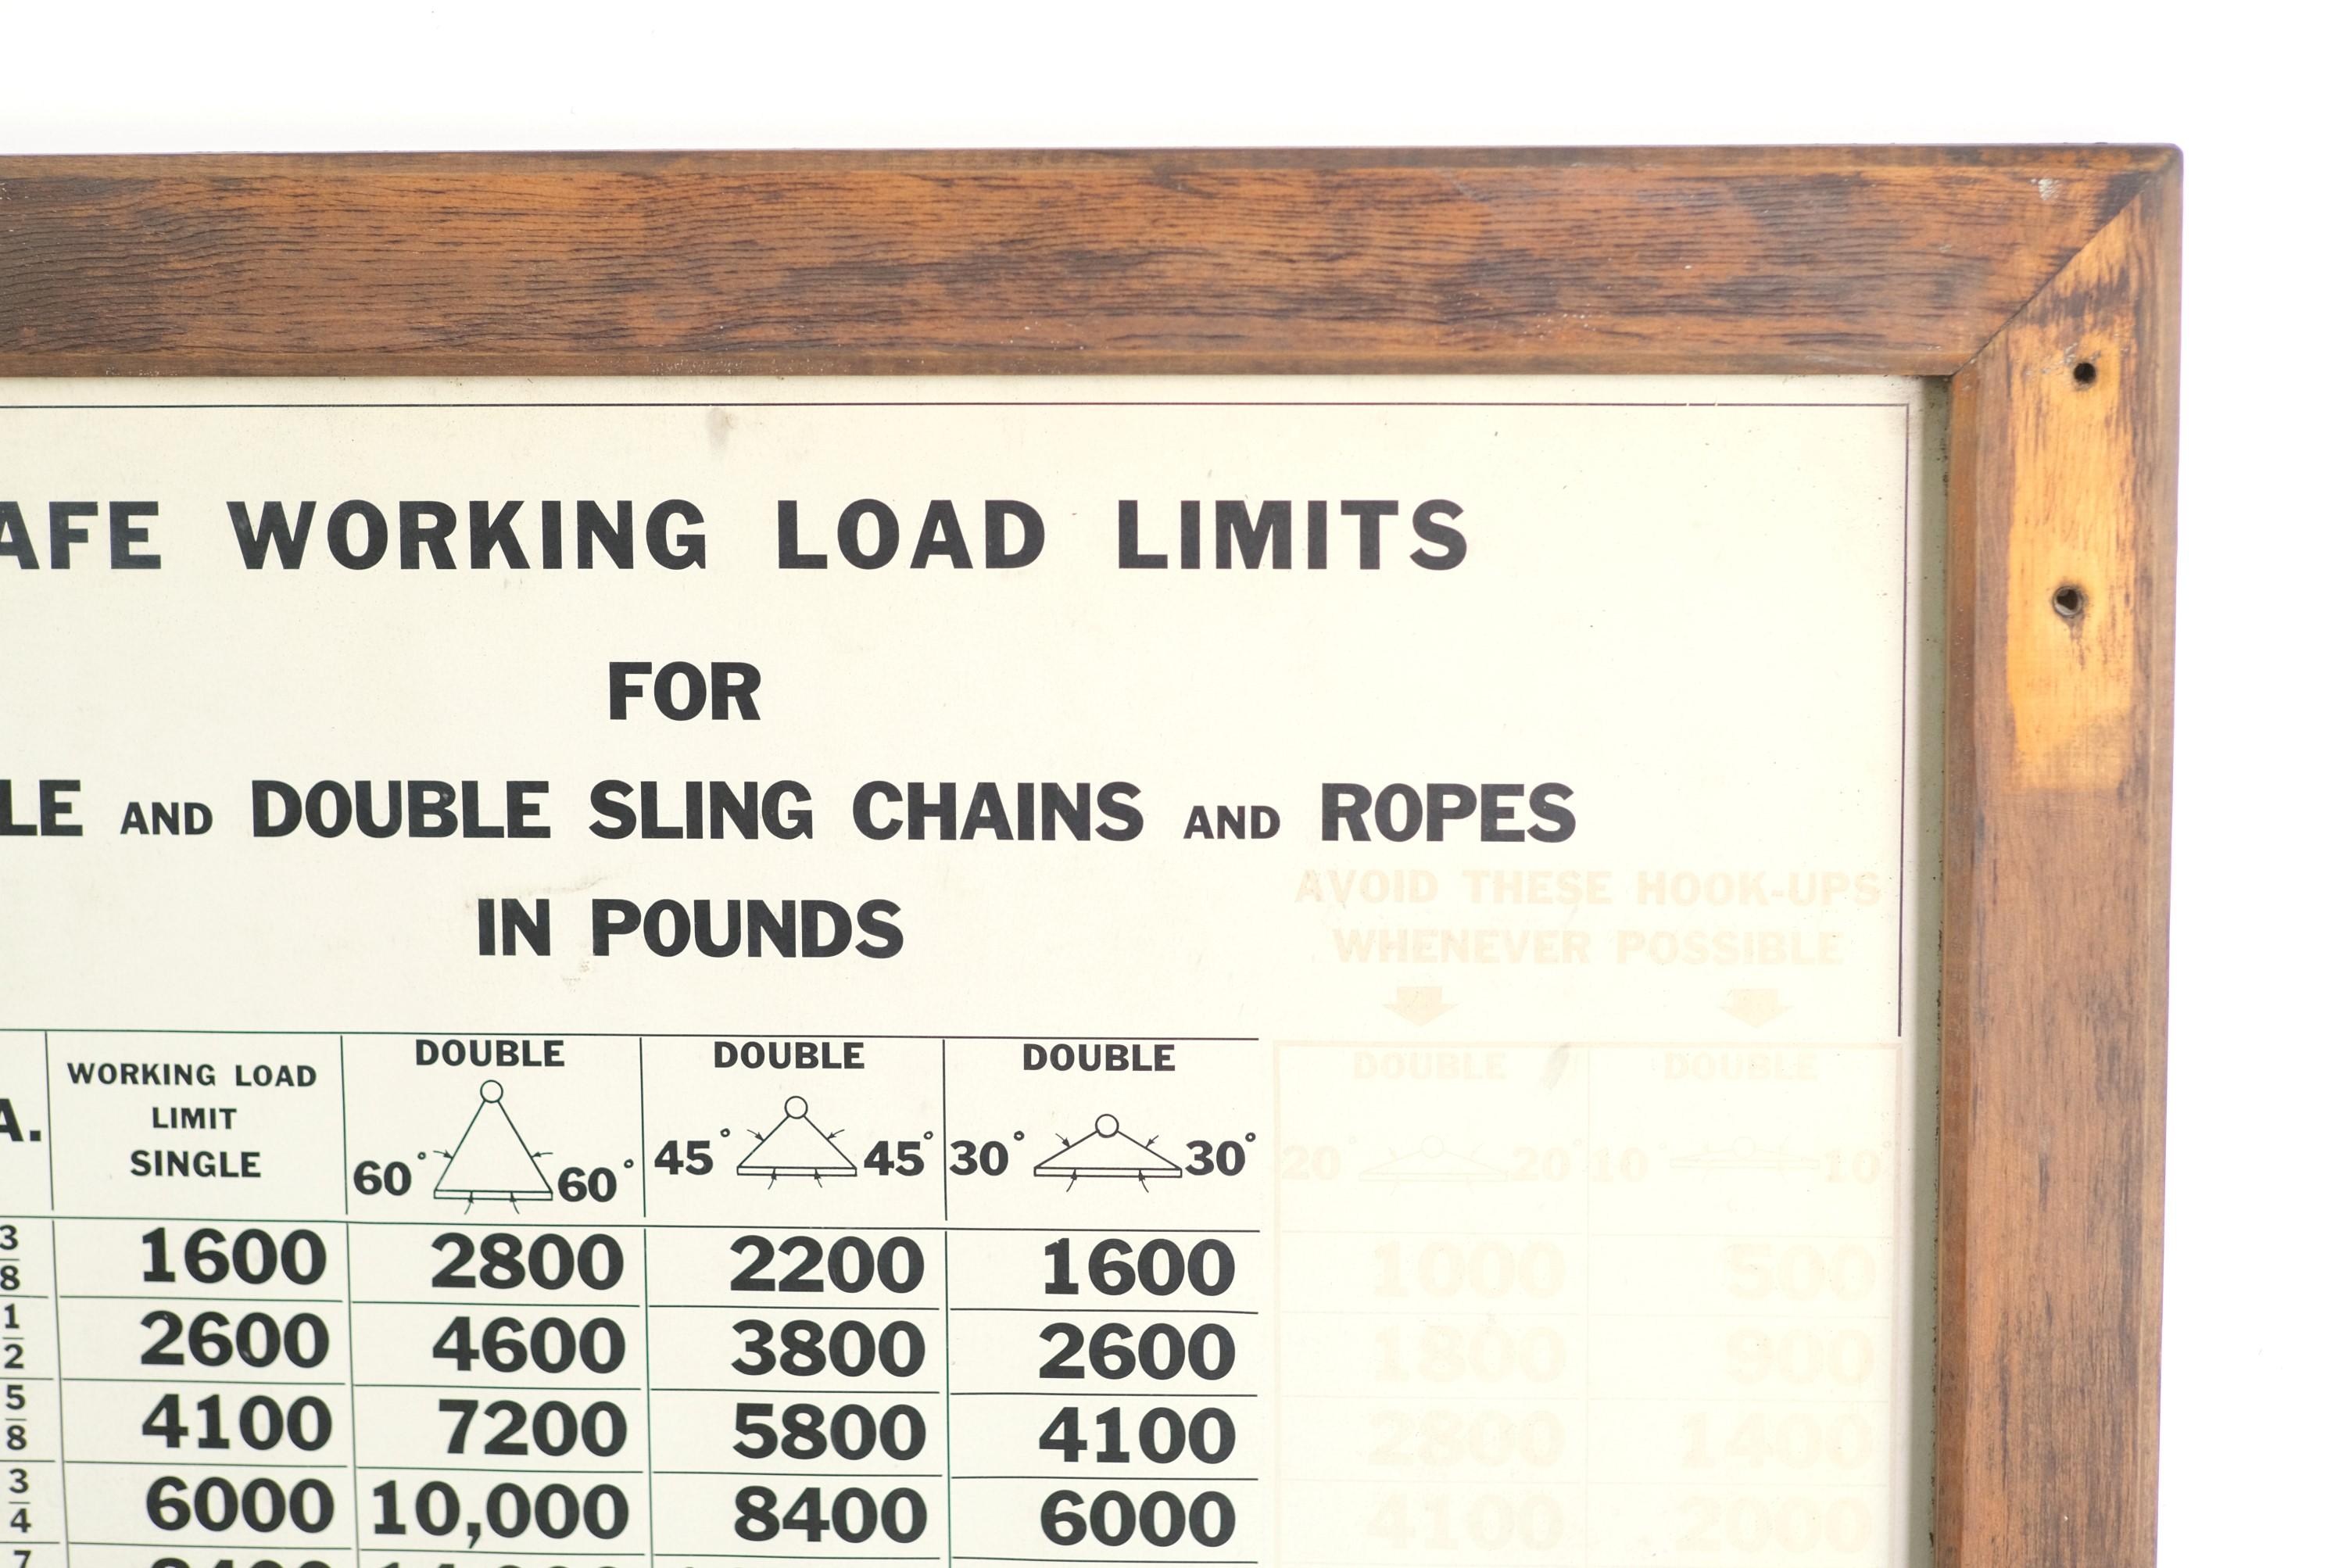 Large scale mid-20th century pine wood framed Industrial poster showing safe working limits for various types of rigging loads on a factory or warehouse floor.